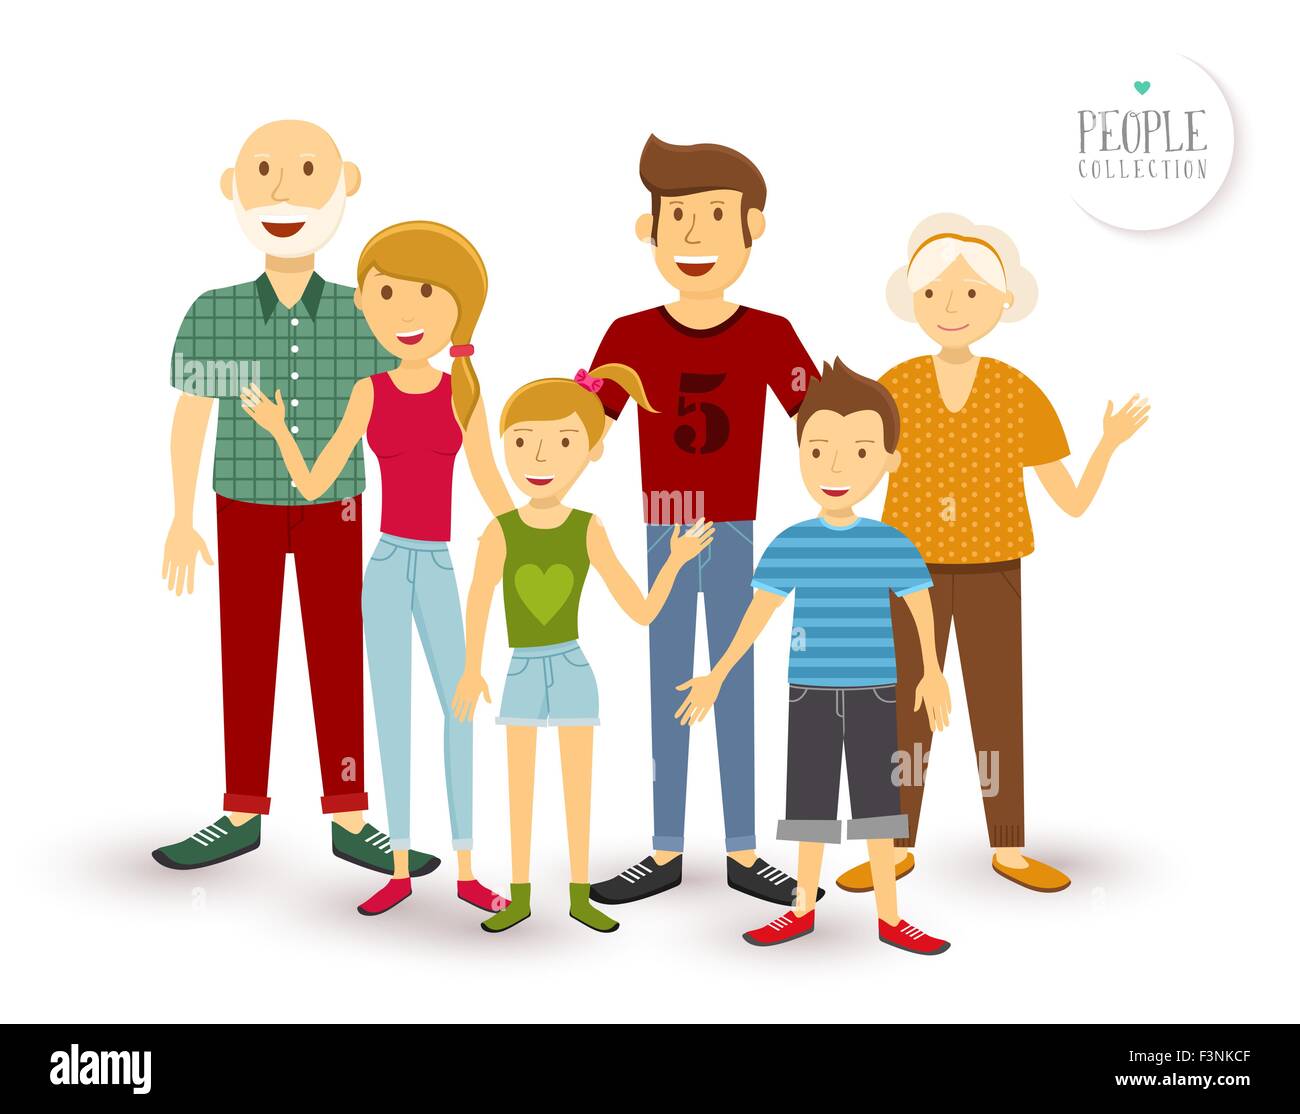 People collection: happy family group generation with dad mom, children and grandparents in flat style illustration. EPS10 vecto Stock Vector